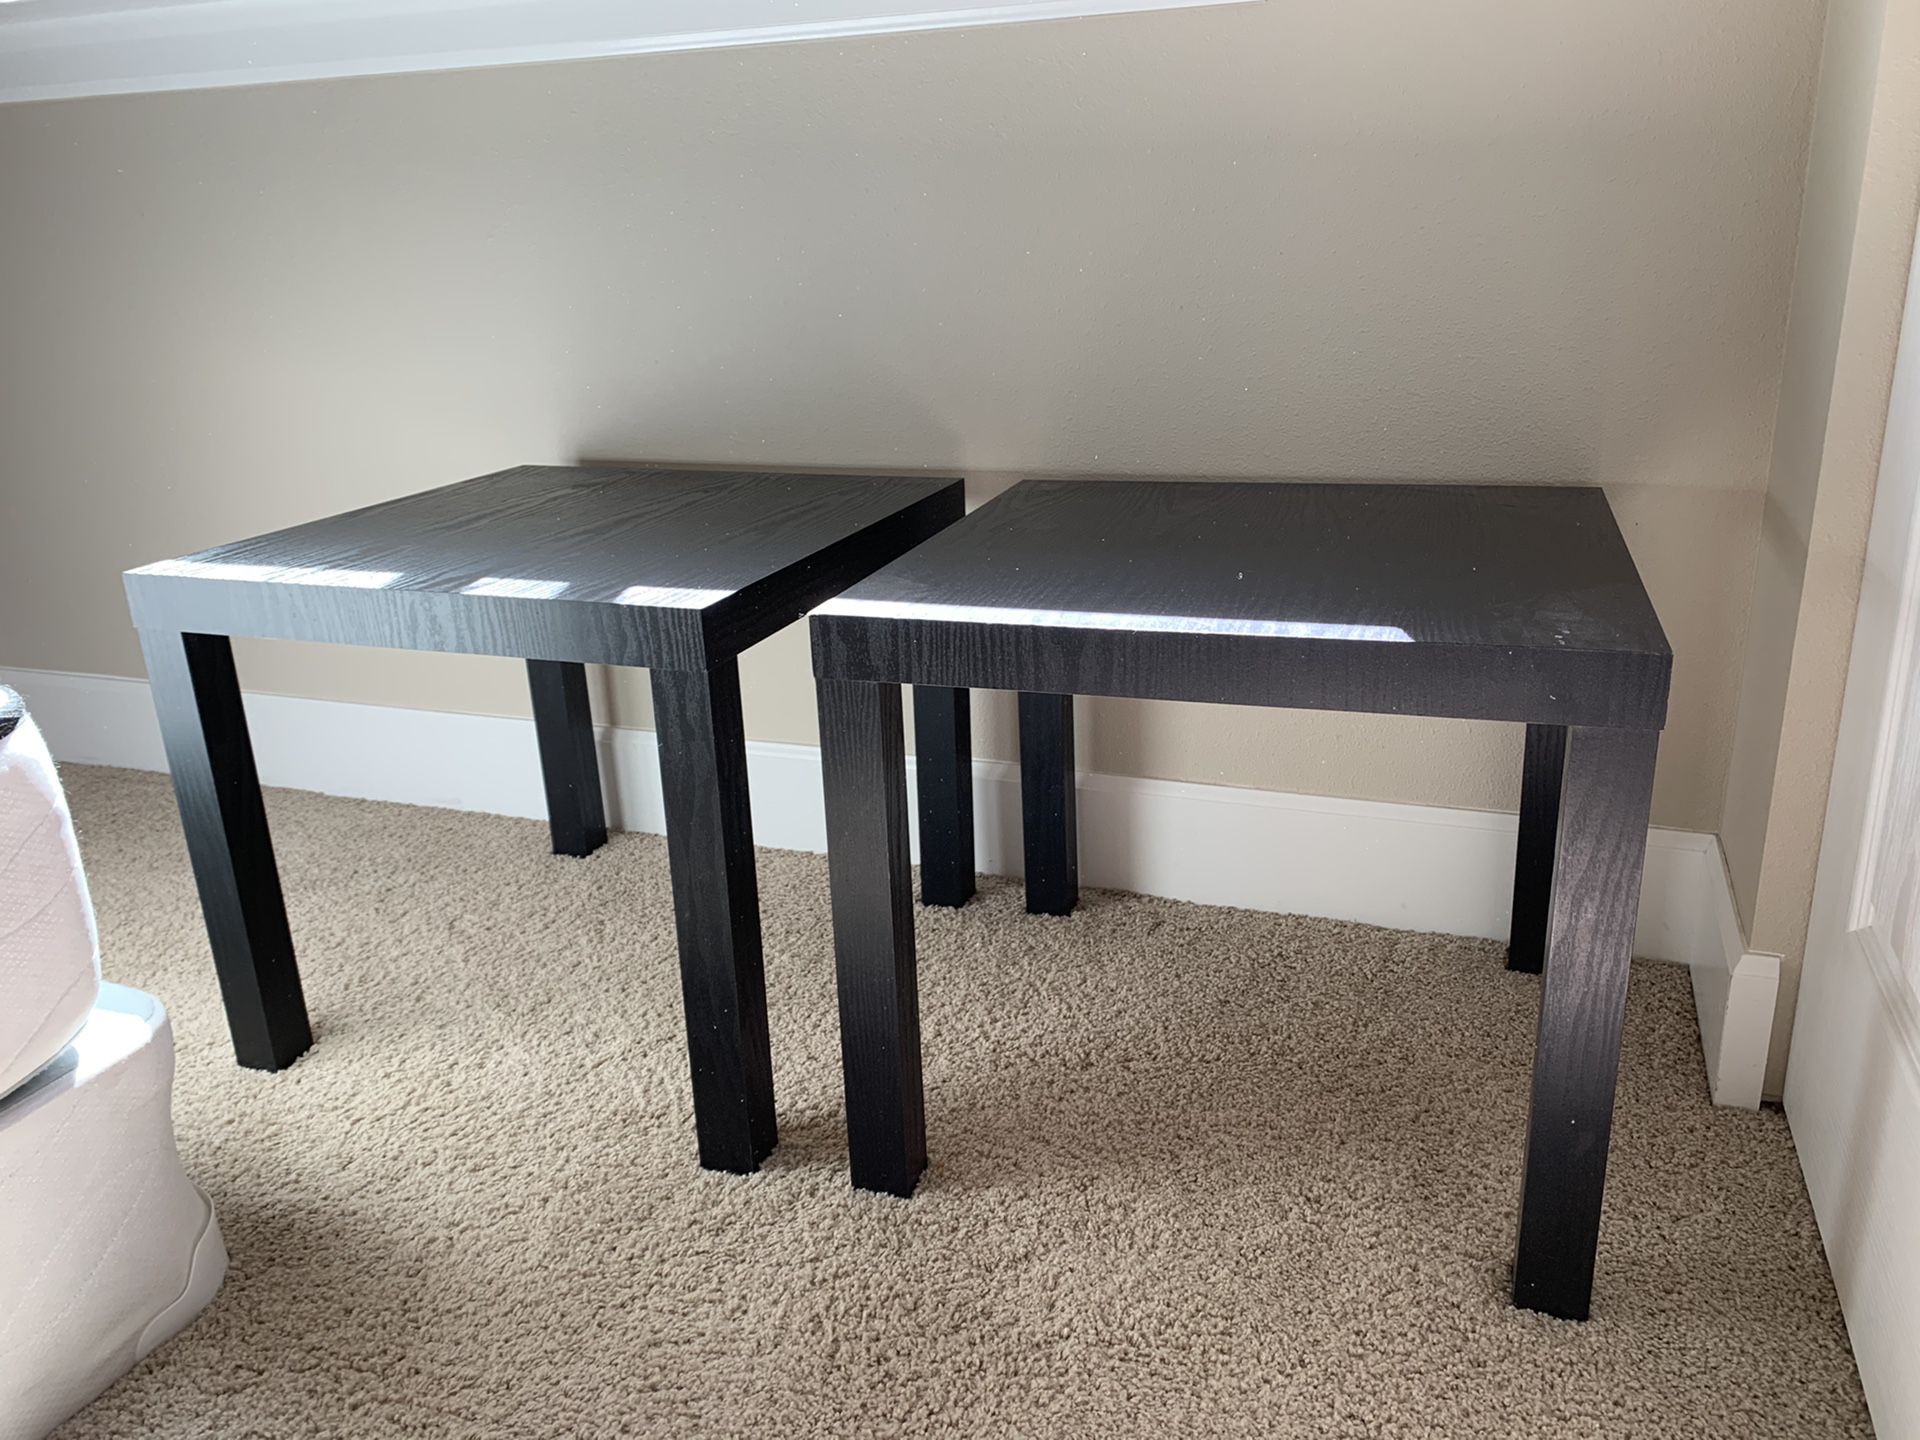 IKEA end tables